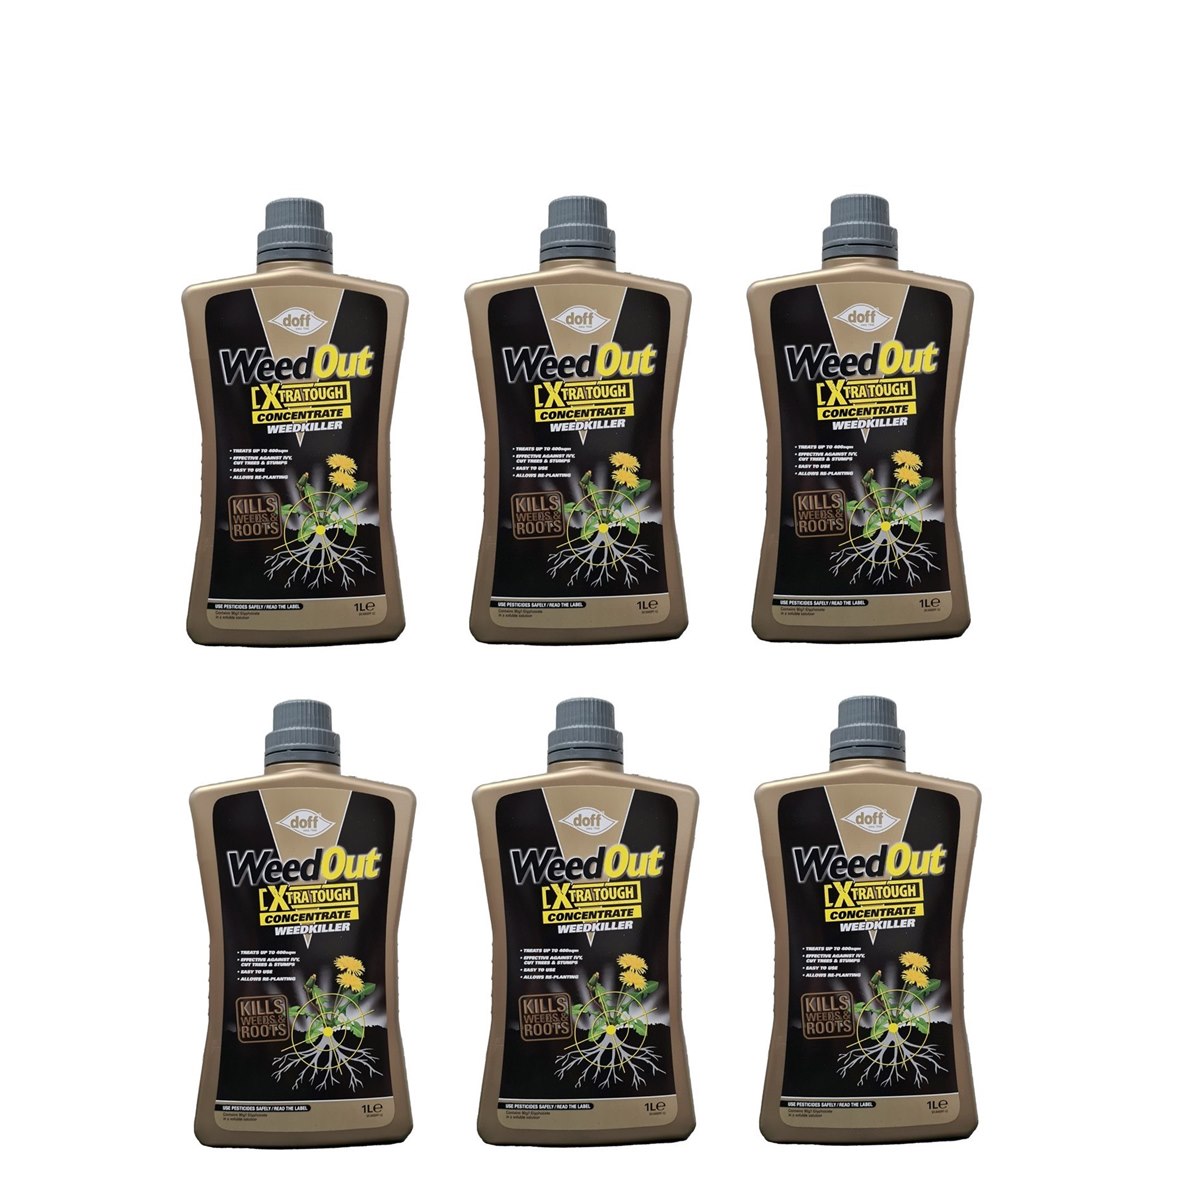 Case of 6 x Doff Weedout Xtra Tough Weedkiller Concentrate 1 Litre